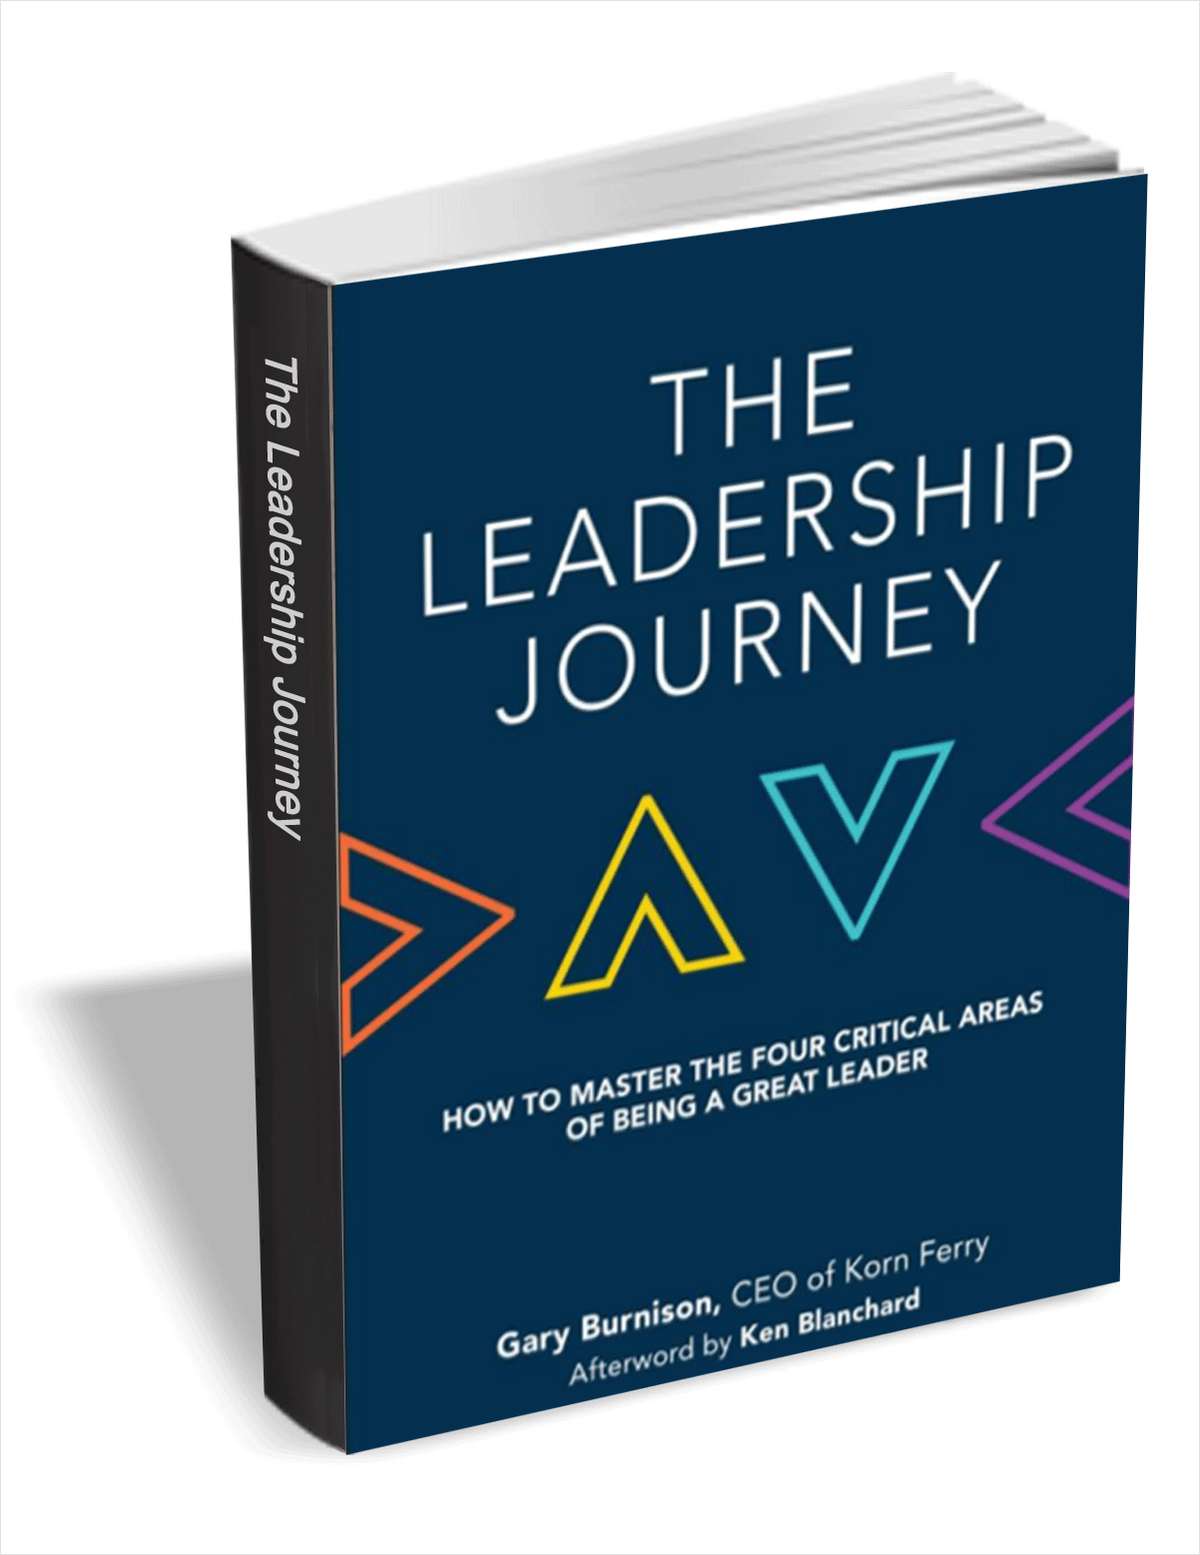 The Leadership Journey - How to Master the Four Critical Areas of Being a Great Leader ($15 Value) FREE For a Limited Time